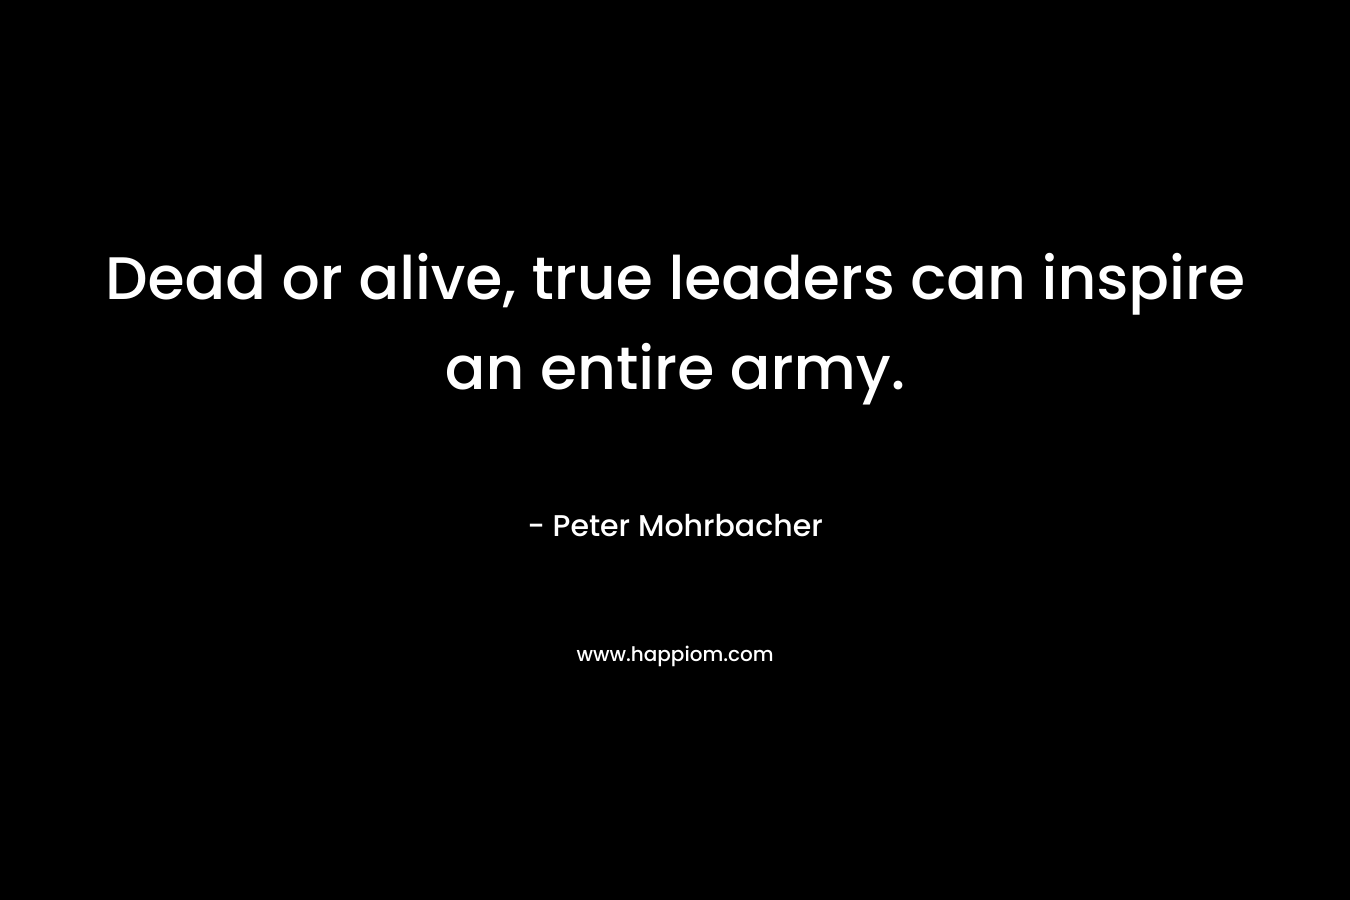 Dead or alive, true leaders can inspire an entire army. – Peter Mohrbacher